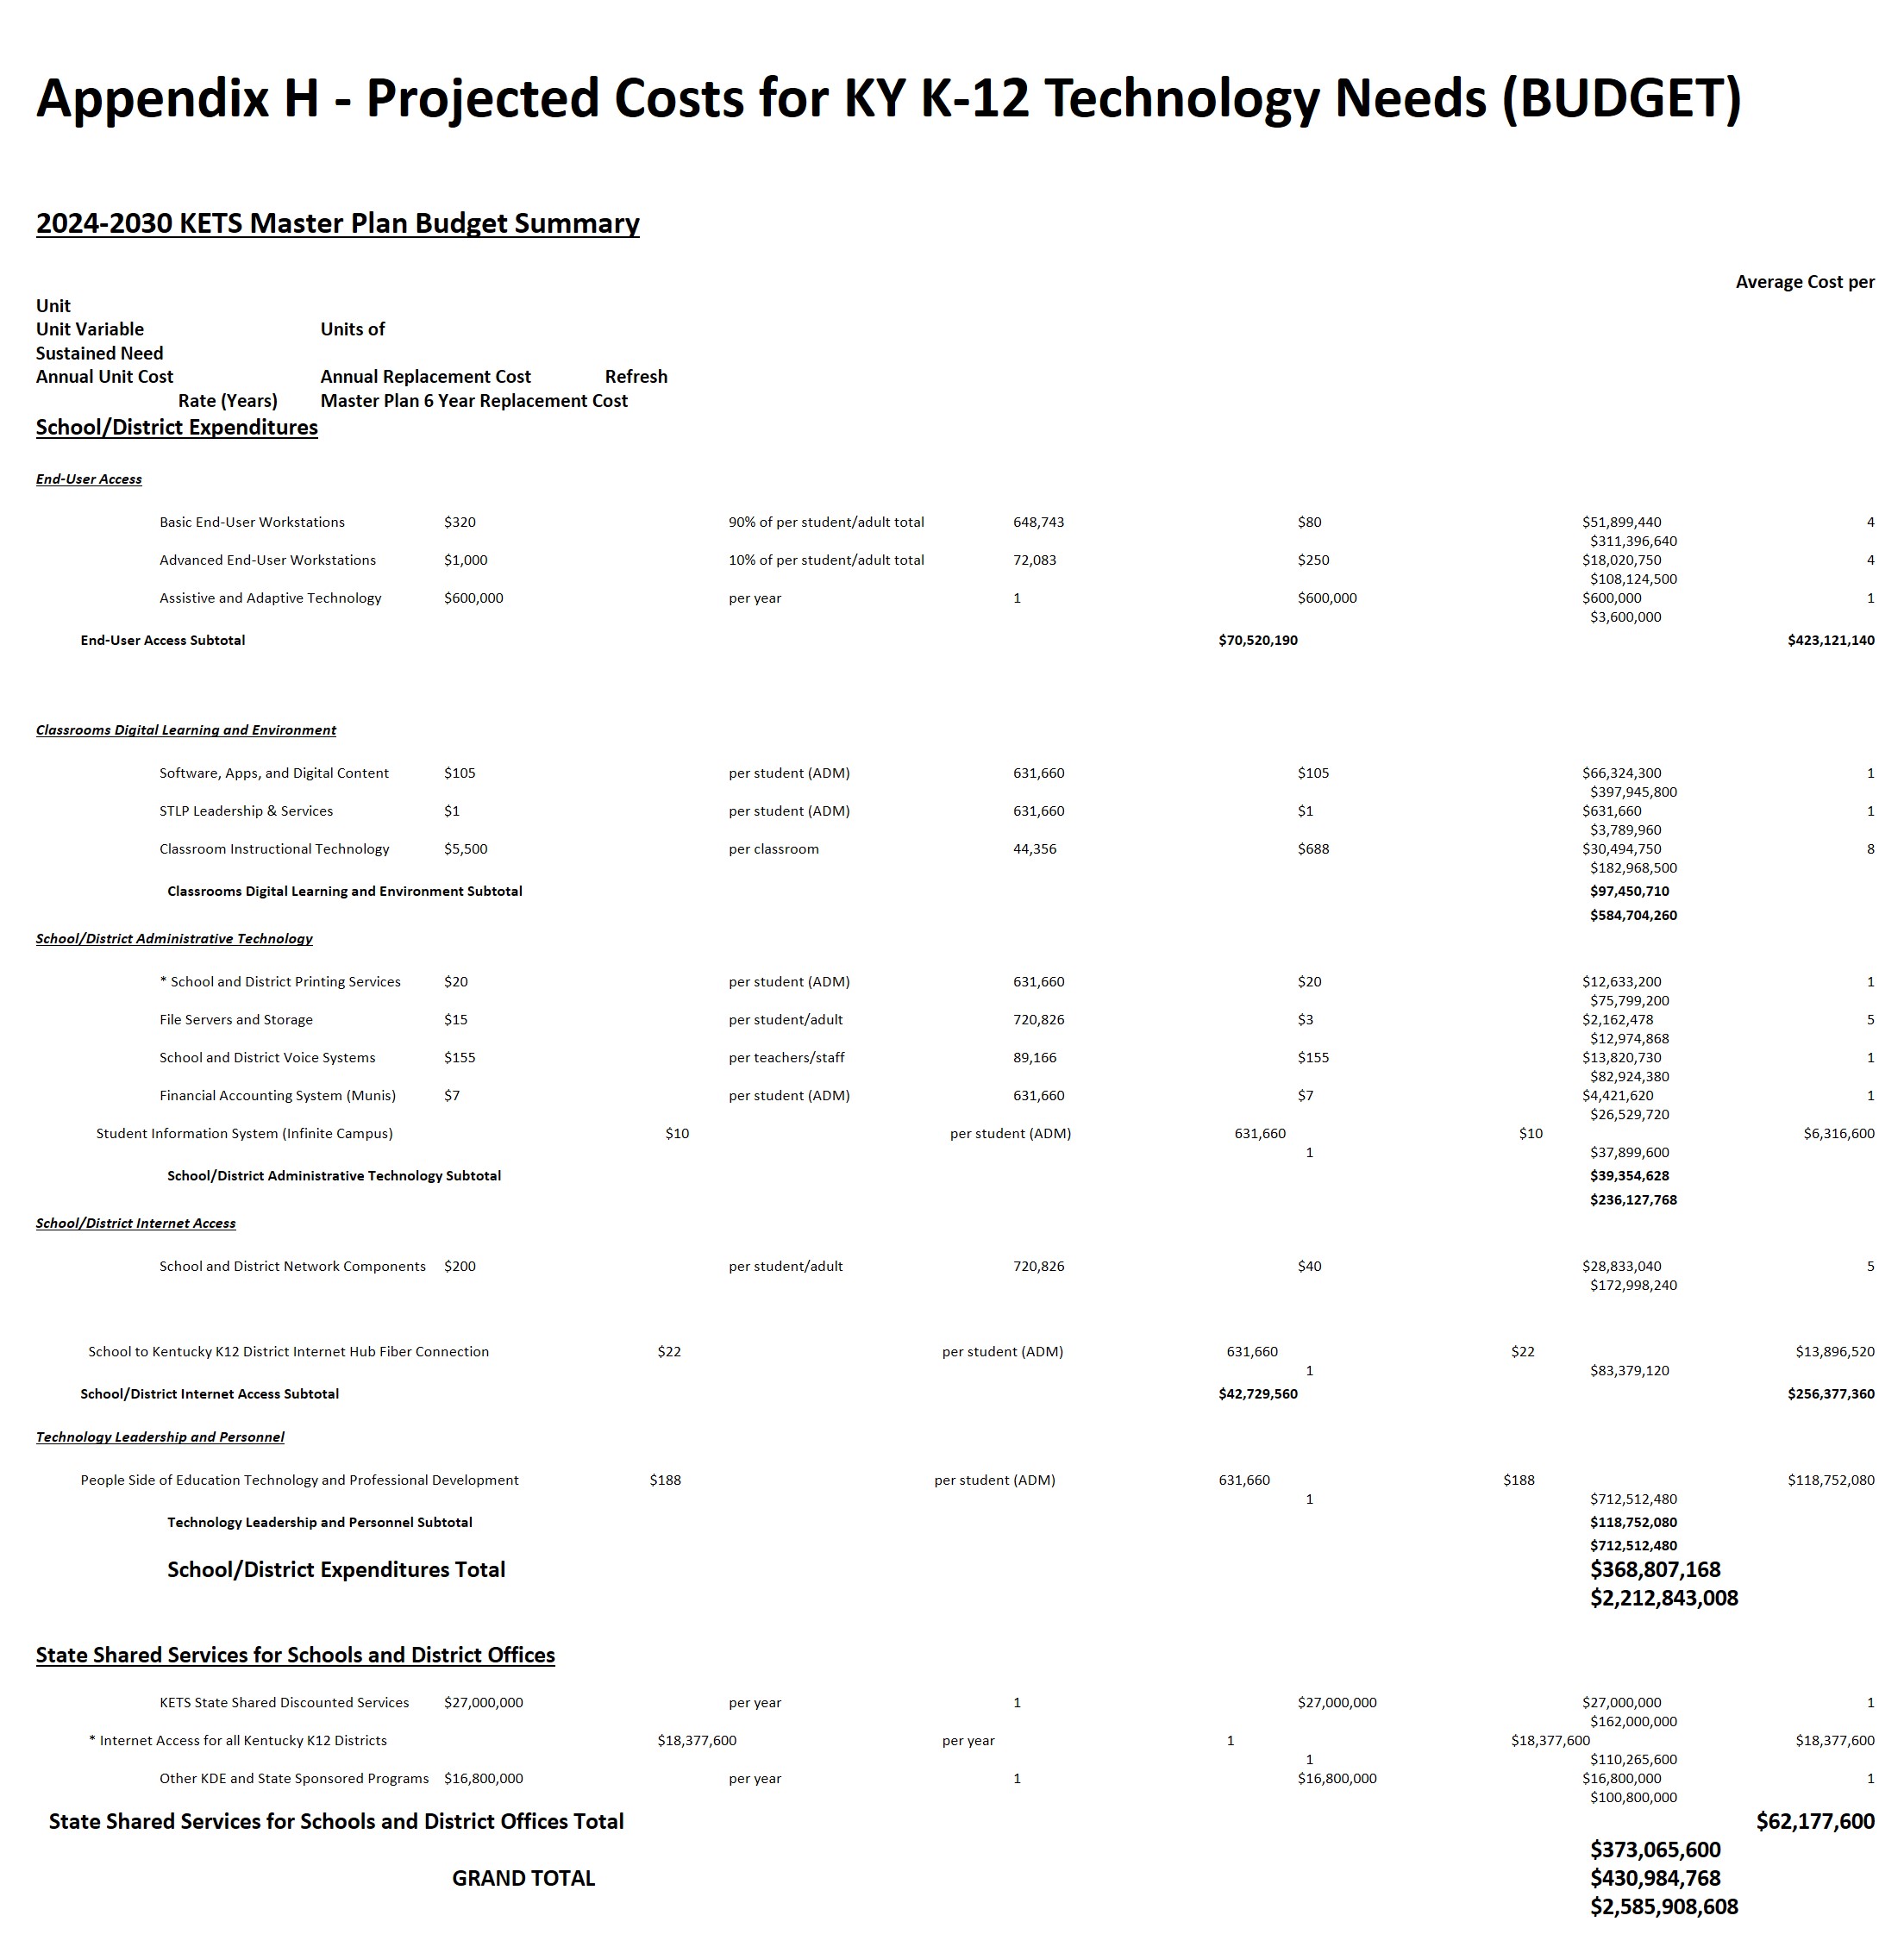 Projected Costs for KY K-12 Technology Needs.jpg